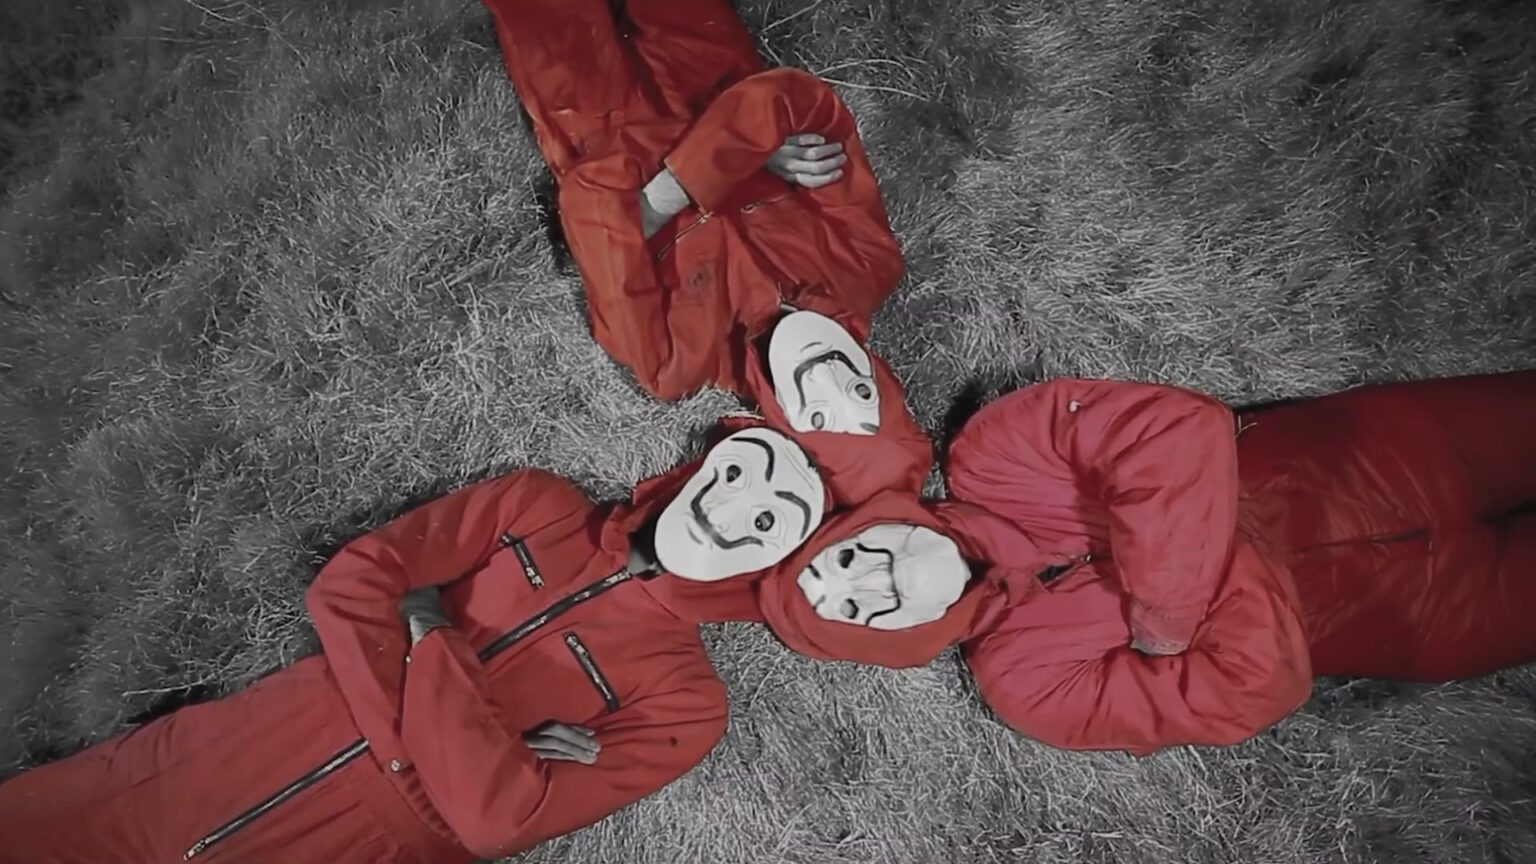 Did you finish up your binge of 'Money Heist'? Here are other shows on Netflix which should help with those 'Money Heist' cravings.